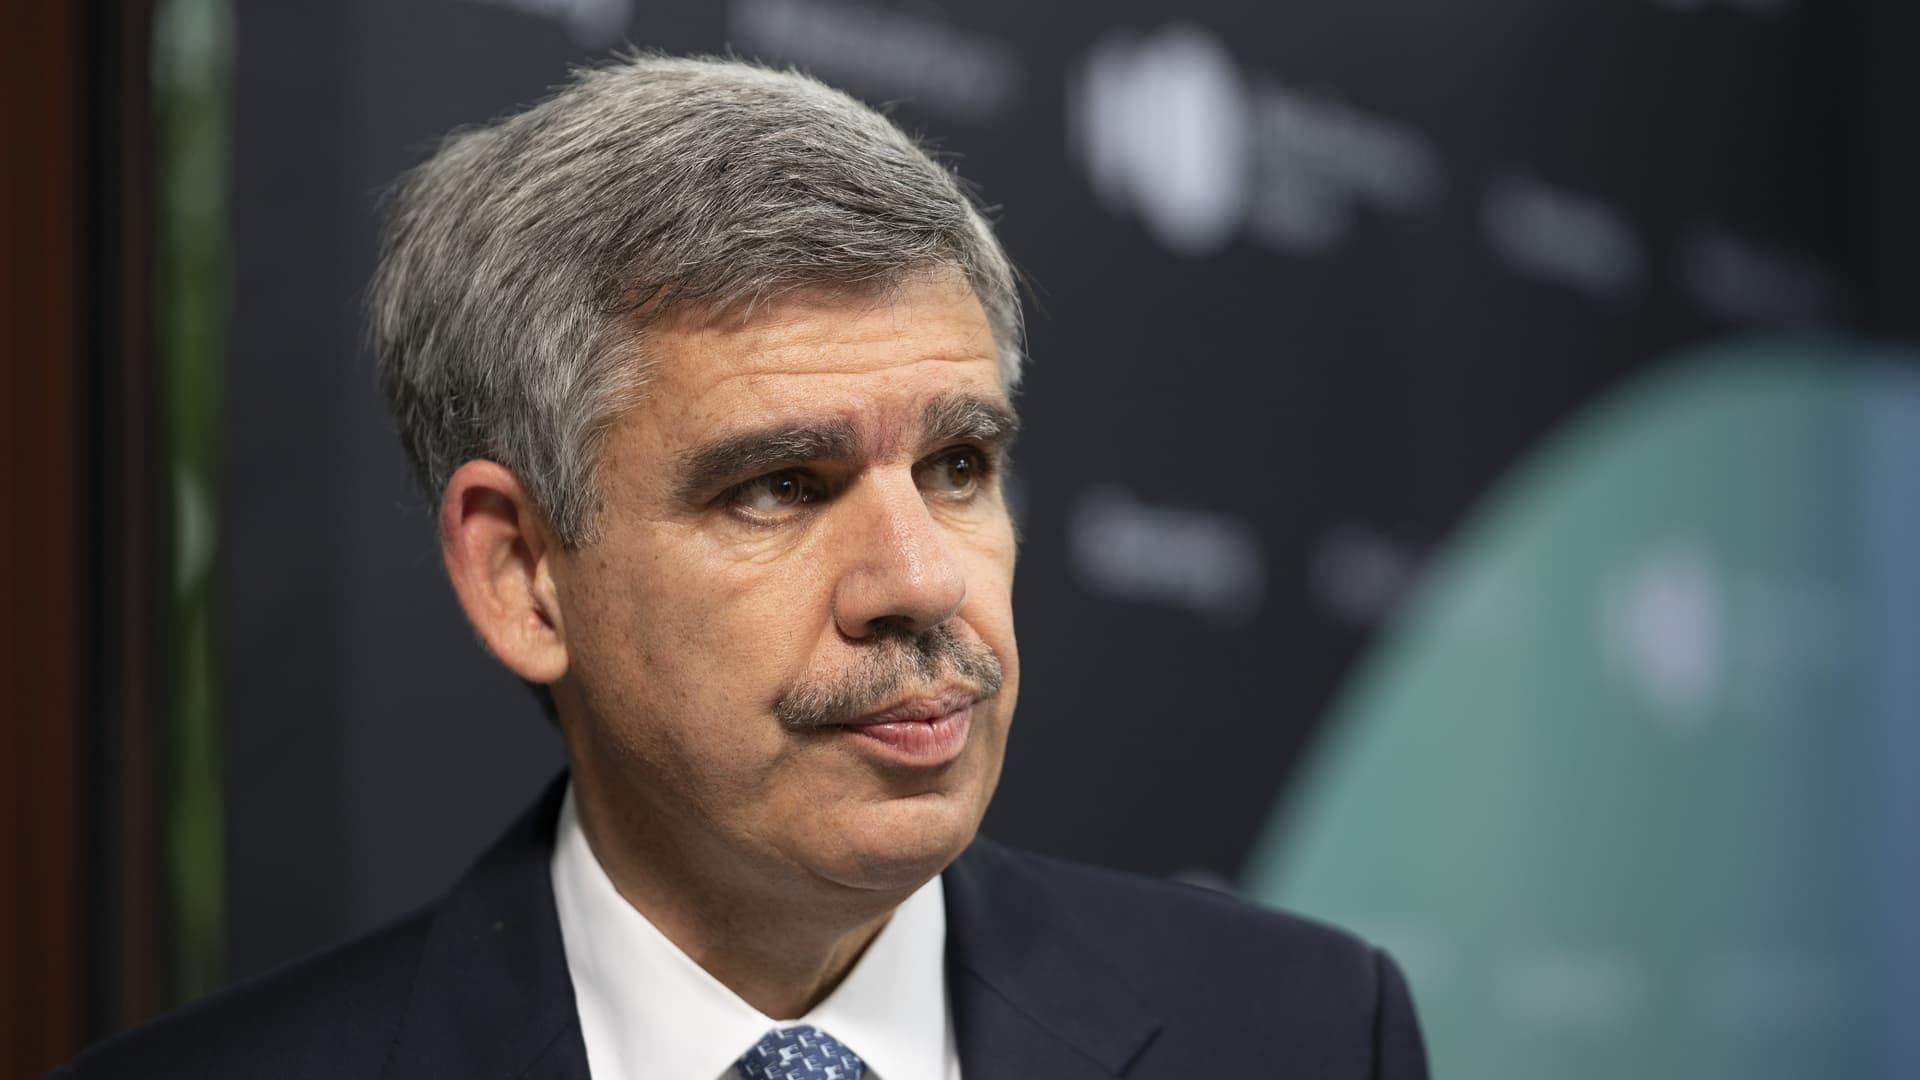 Mohamed El-Erian says the Fed’s credibility is at stake as financial accidents spread